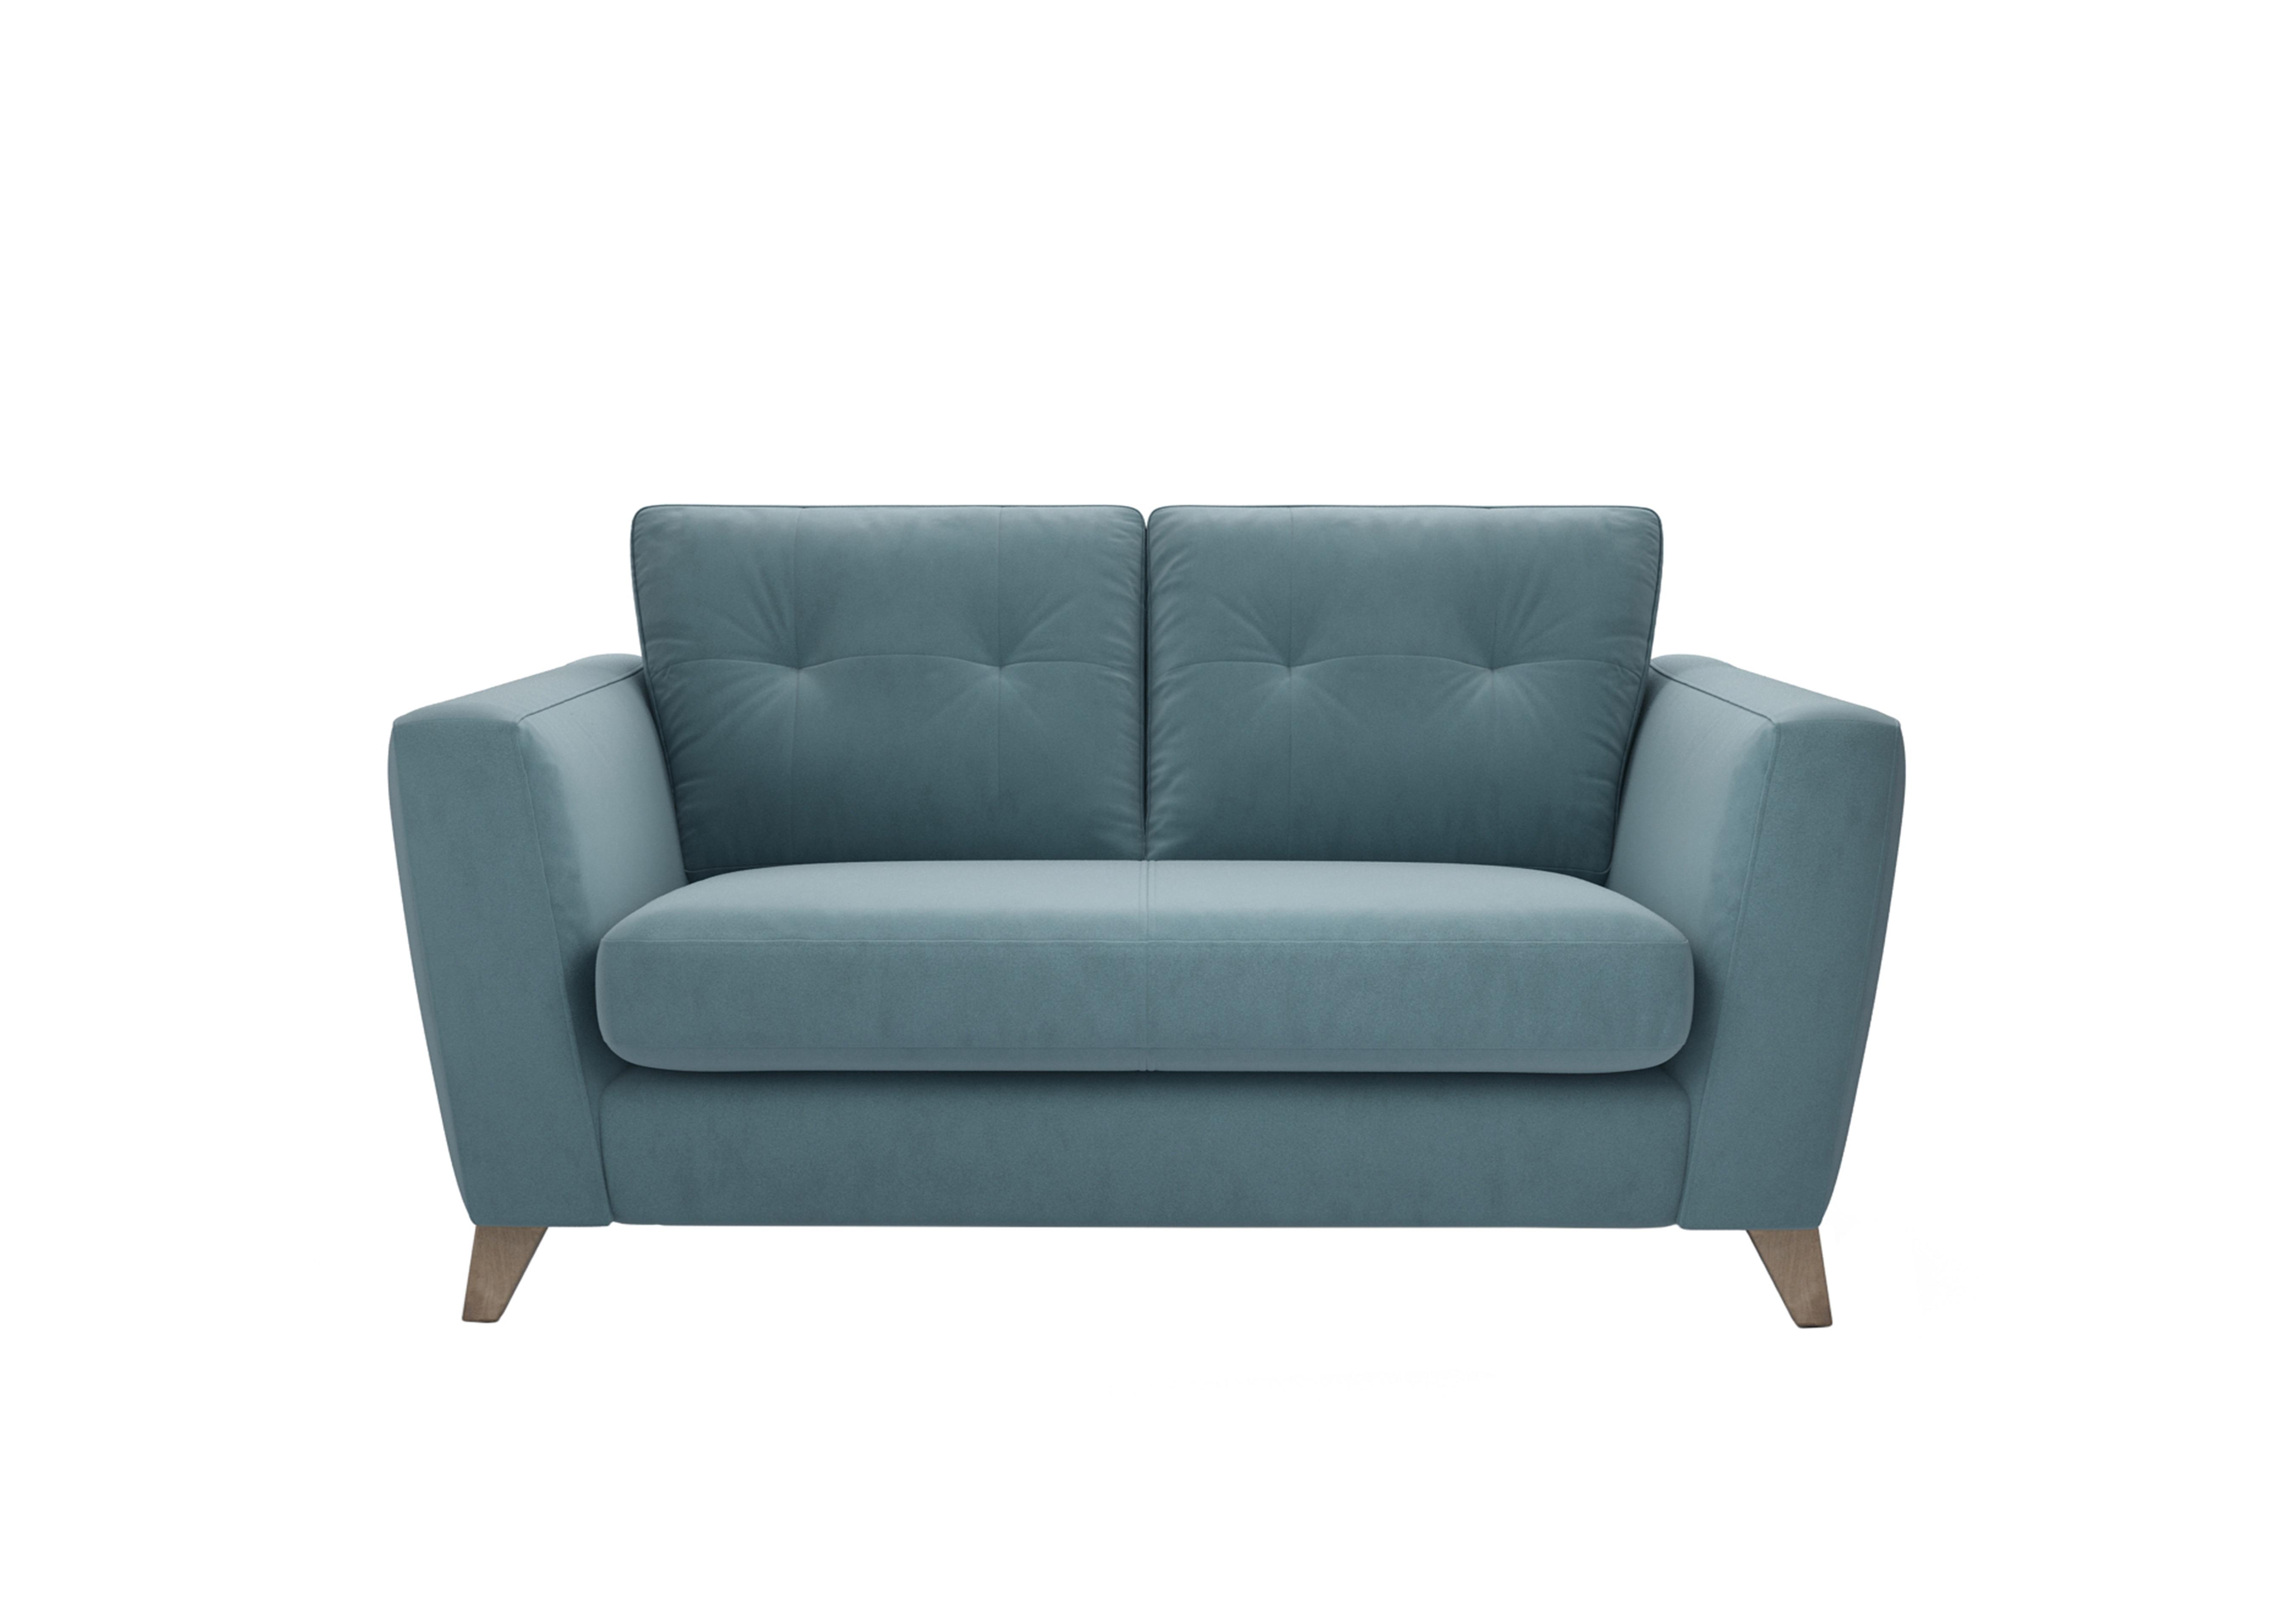 Hermione 2 Seater Fabric Sofa in Sha252 Shallow Puddle Wo Ft on Furniture Village